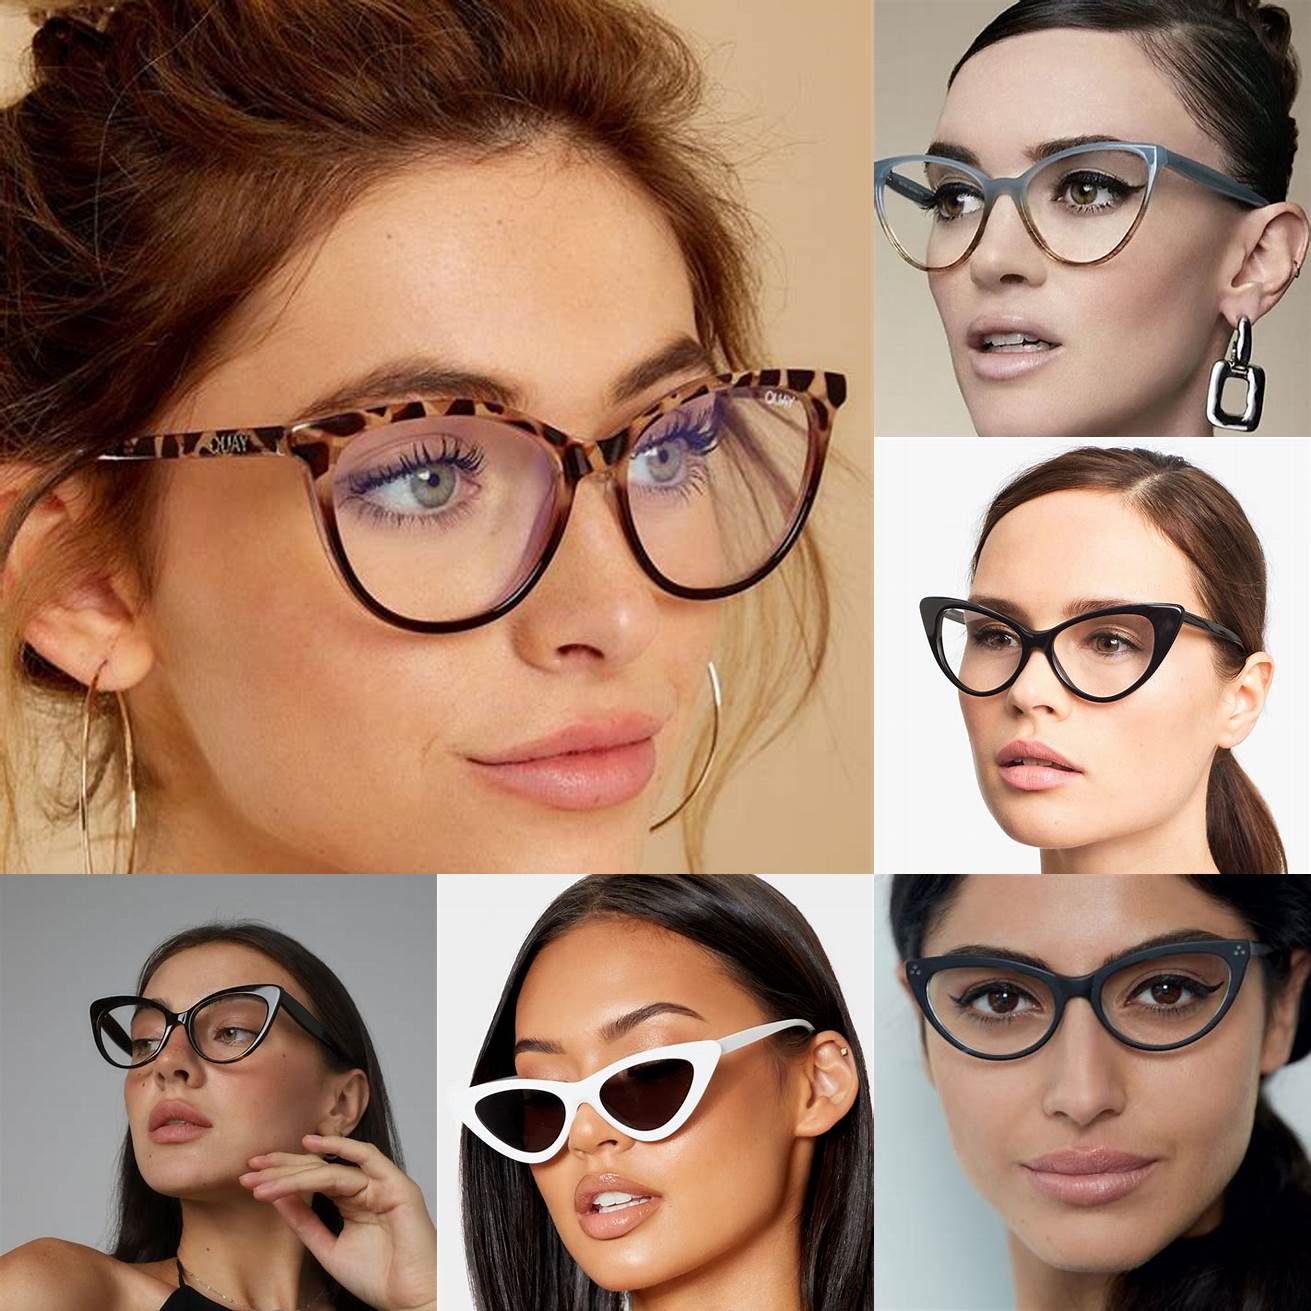 Q Are cat eye glasses suitable for everyday wear